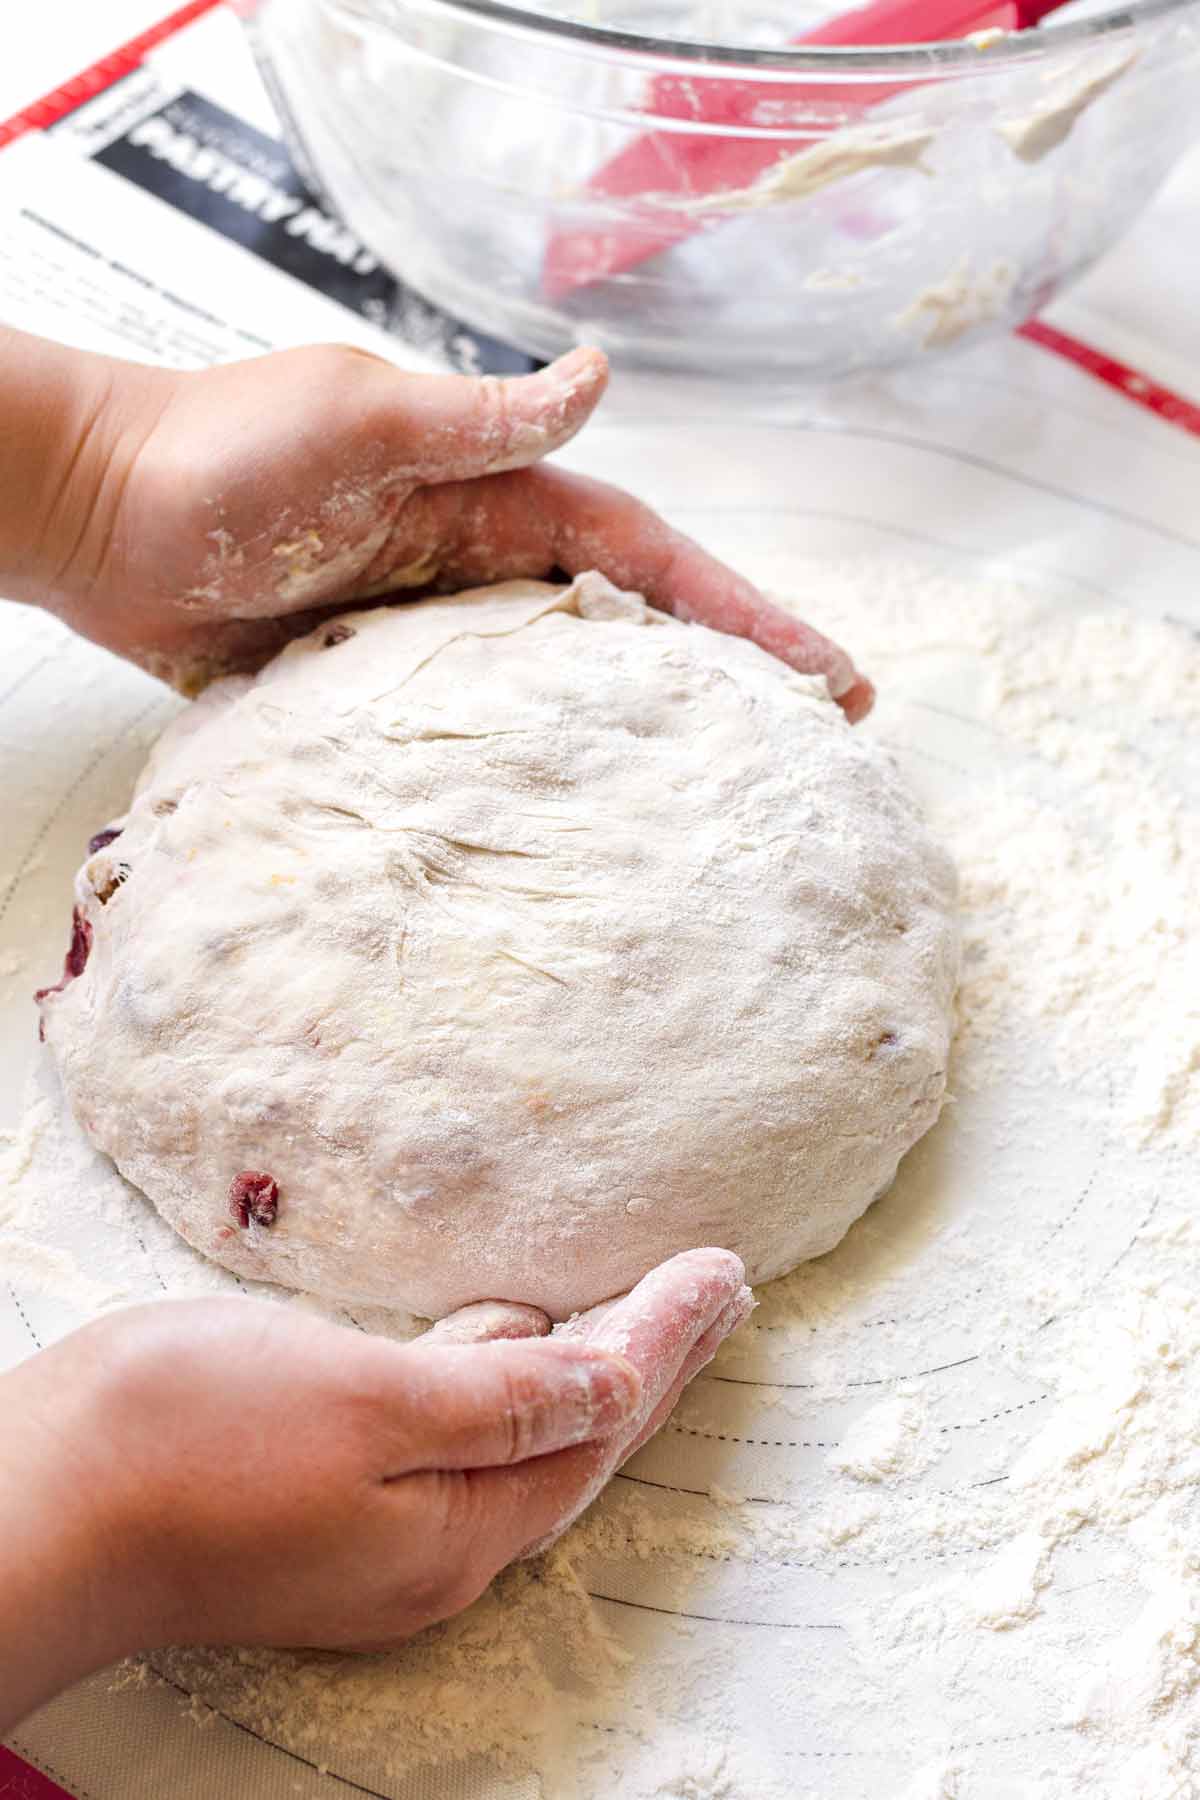 shaping dough with hands